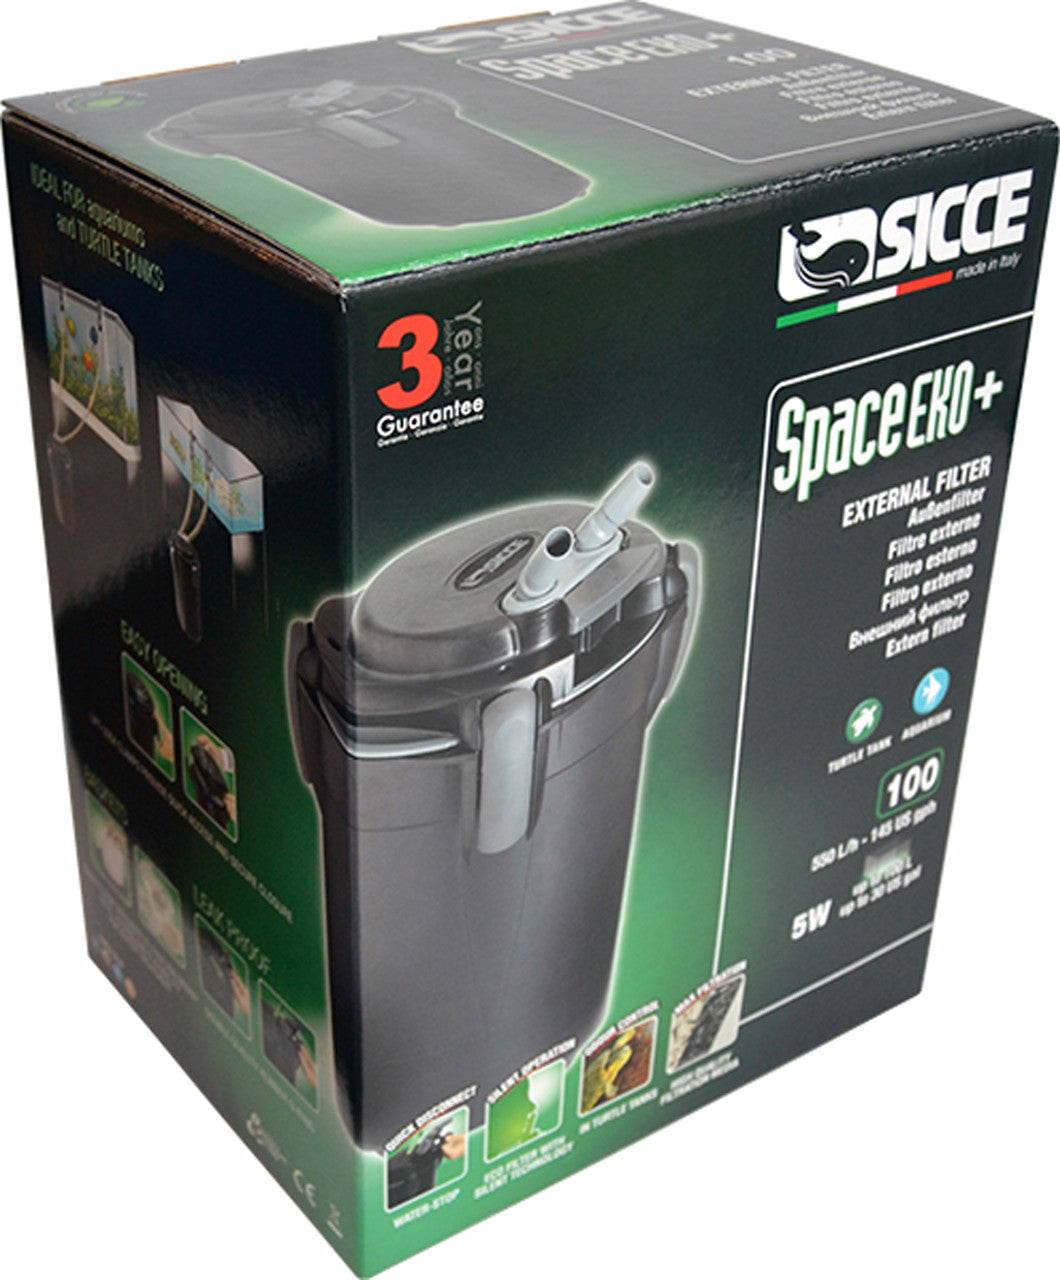 Sicce SPACE EKO 100 Canister Filter - up to 30 gallon aquariums - 145 GPH